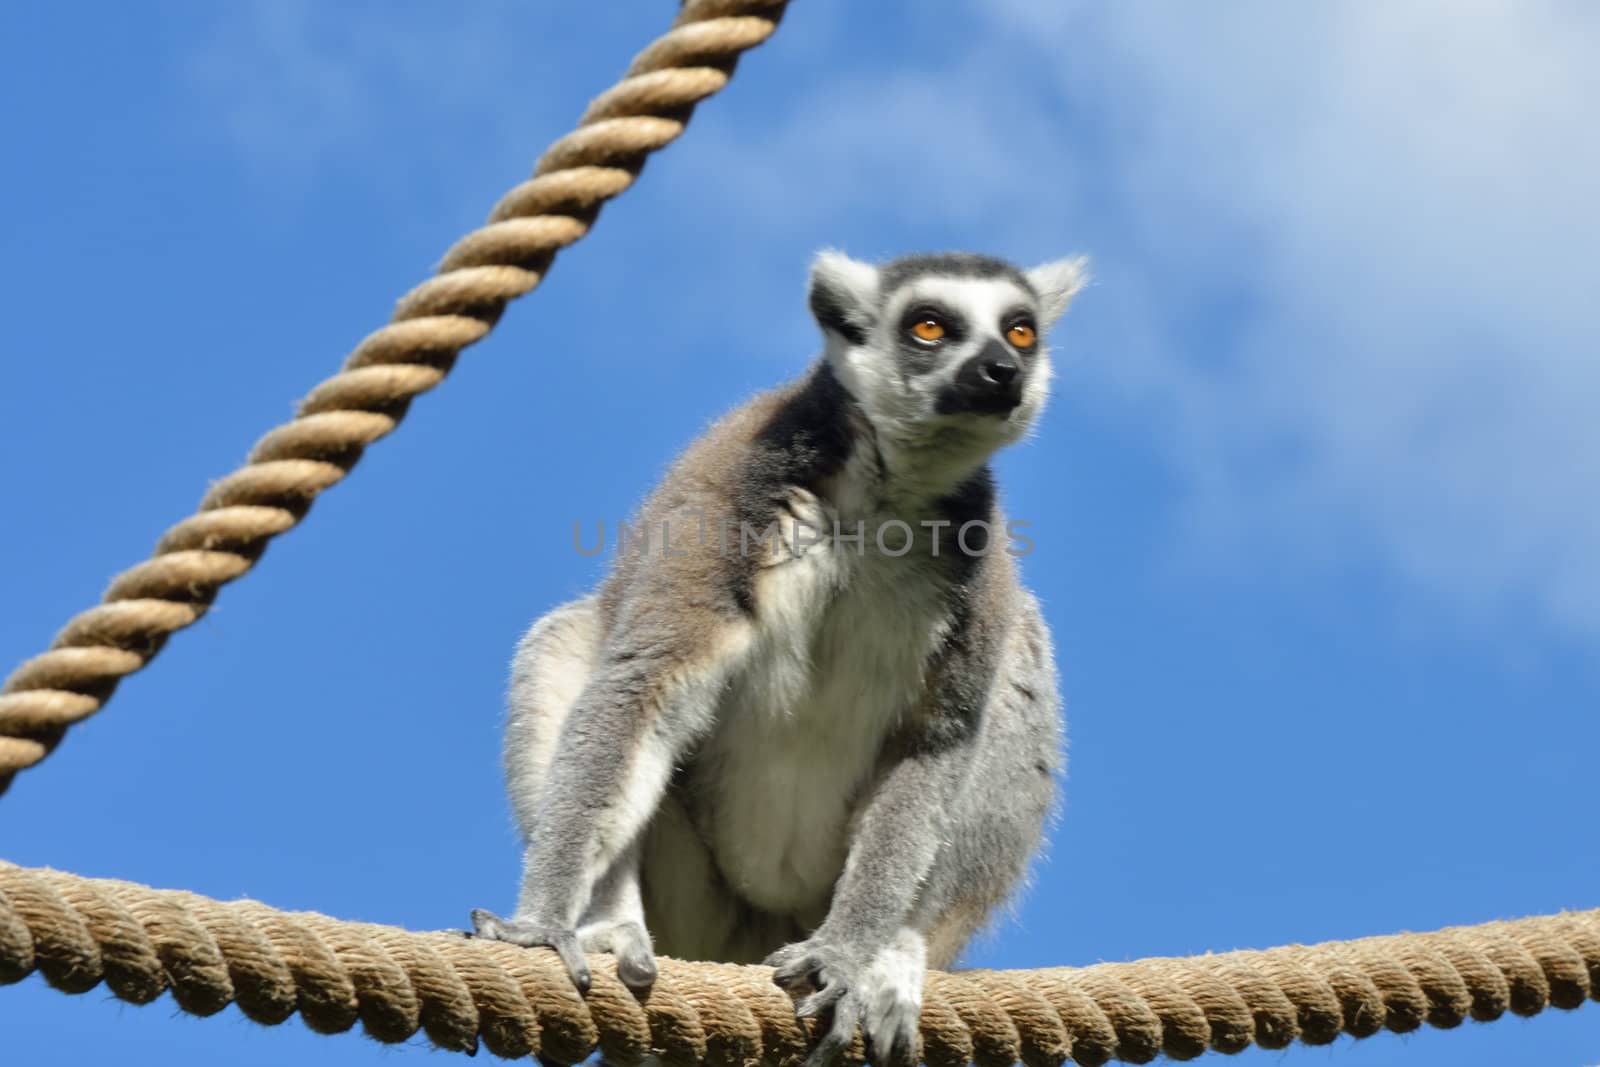 lemur perched on rope